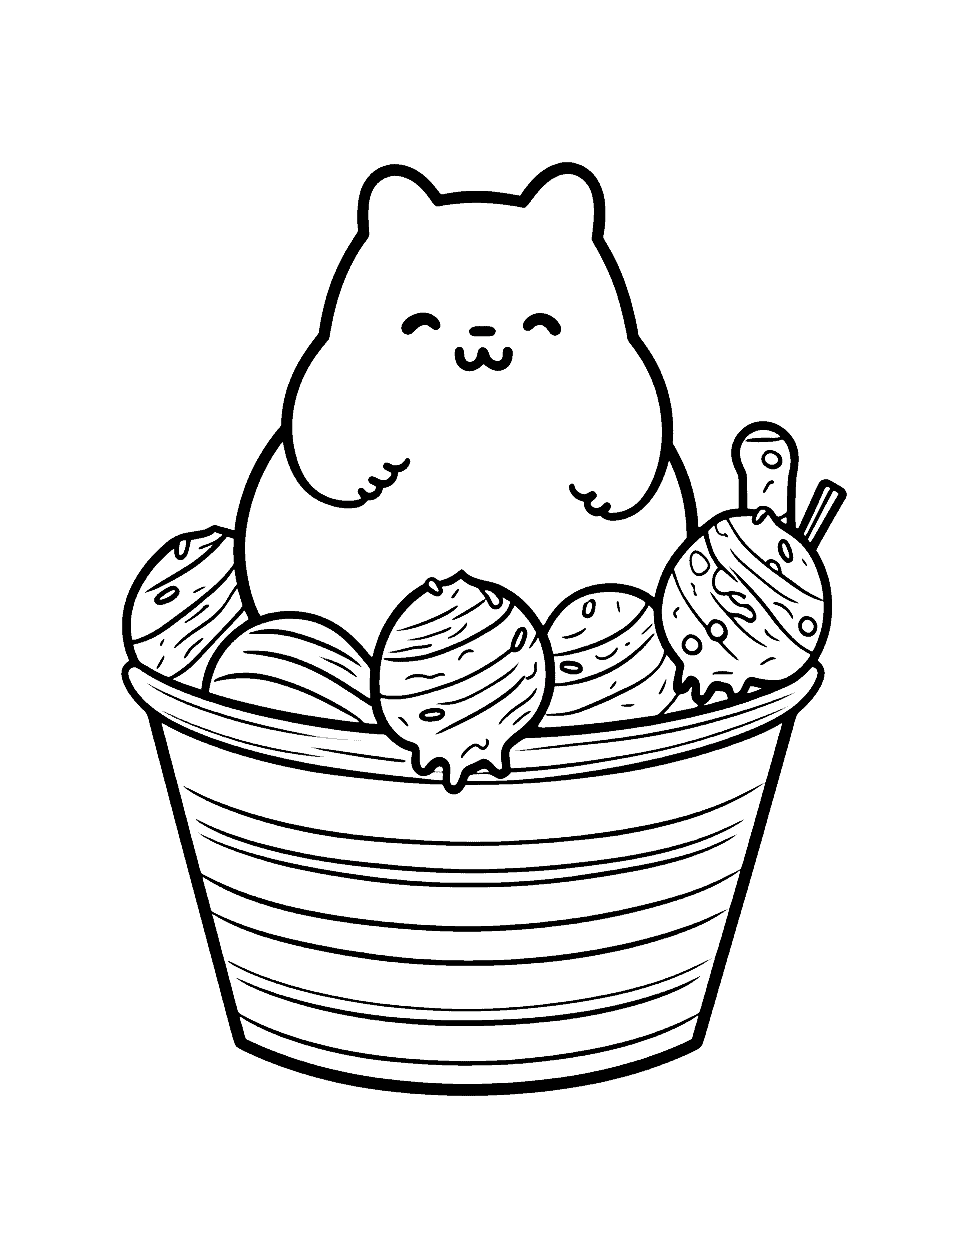 Pusheen's Ice Cream Party Coloring Page - Pusheen enjoying a large bowl of her favorite ice cream flavors.